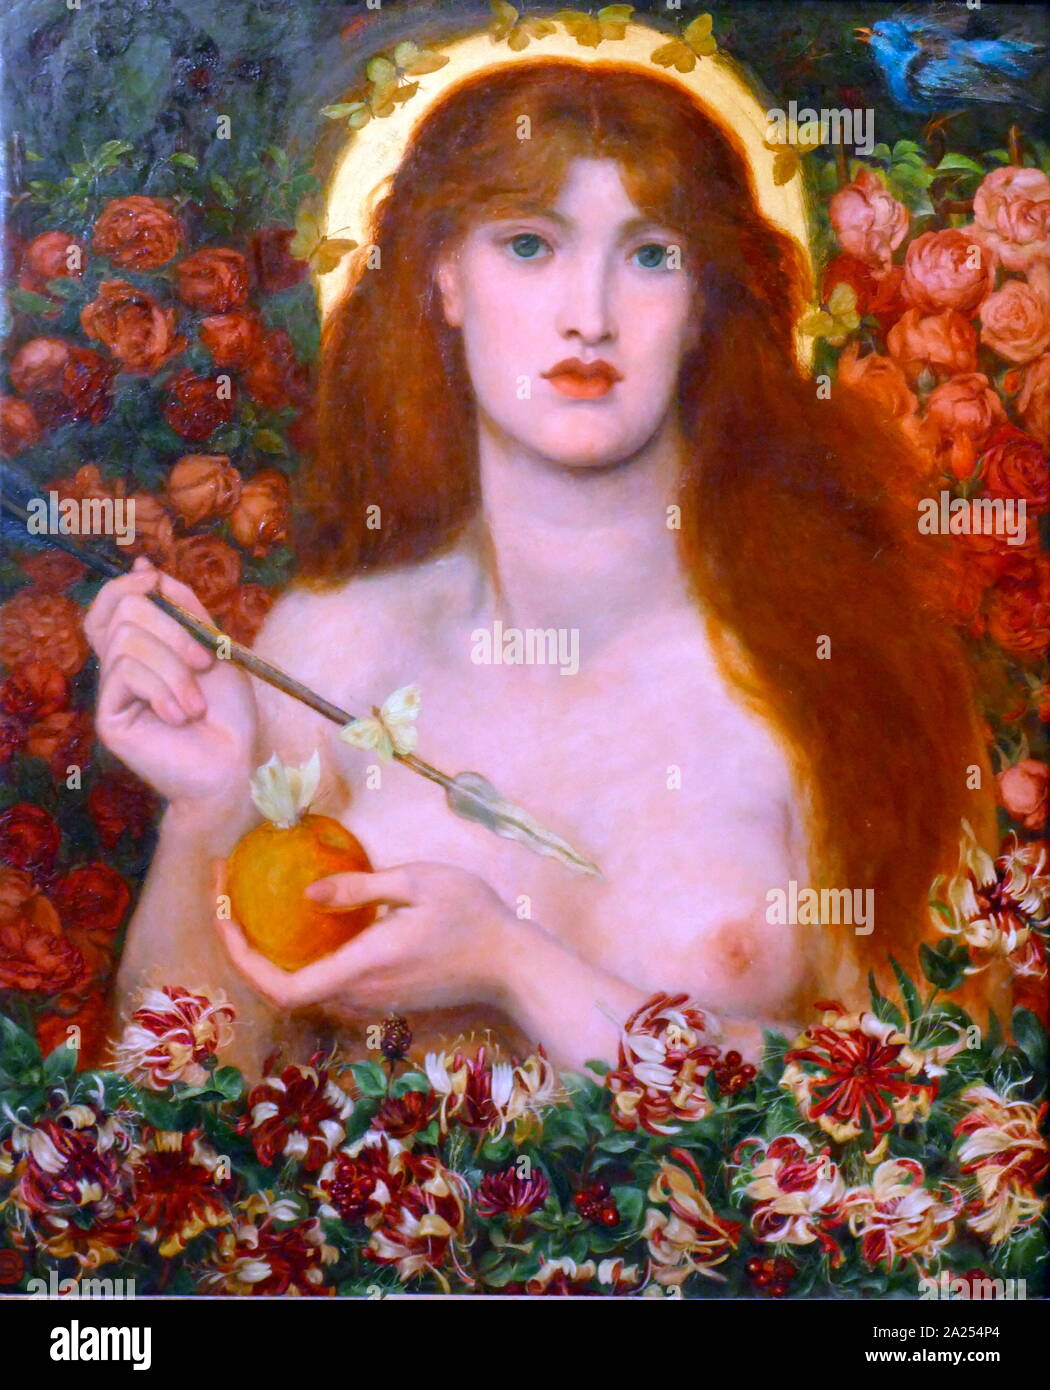 Venus Verticordia (1868), painted by Dante Gabriel Rossetti. Venus Verticordia ('the changer of hearts') was an epithet of the Roman goddess Venus, alluding to the goddess' ability to change hearts from lust to chastity. Dante Gabriel Rossetti (1828 - 1882) was a British poet, illustrator, and painter. He founded the Pre-Raphaelite Brotherhood in 1848 Stock Photo